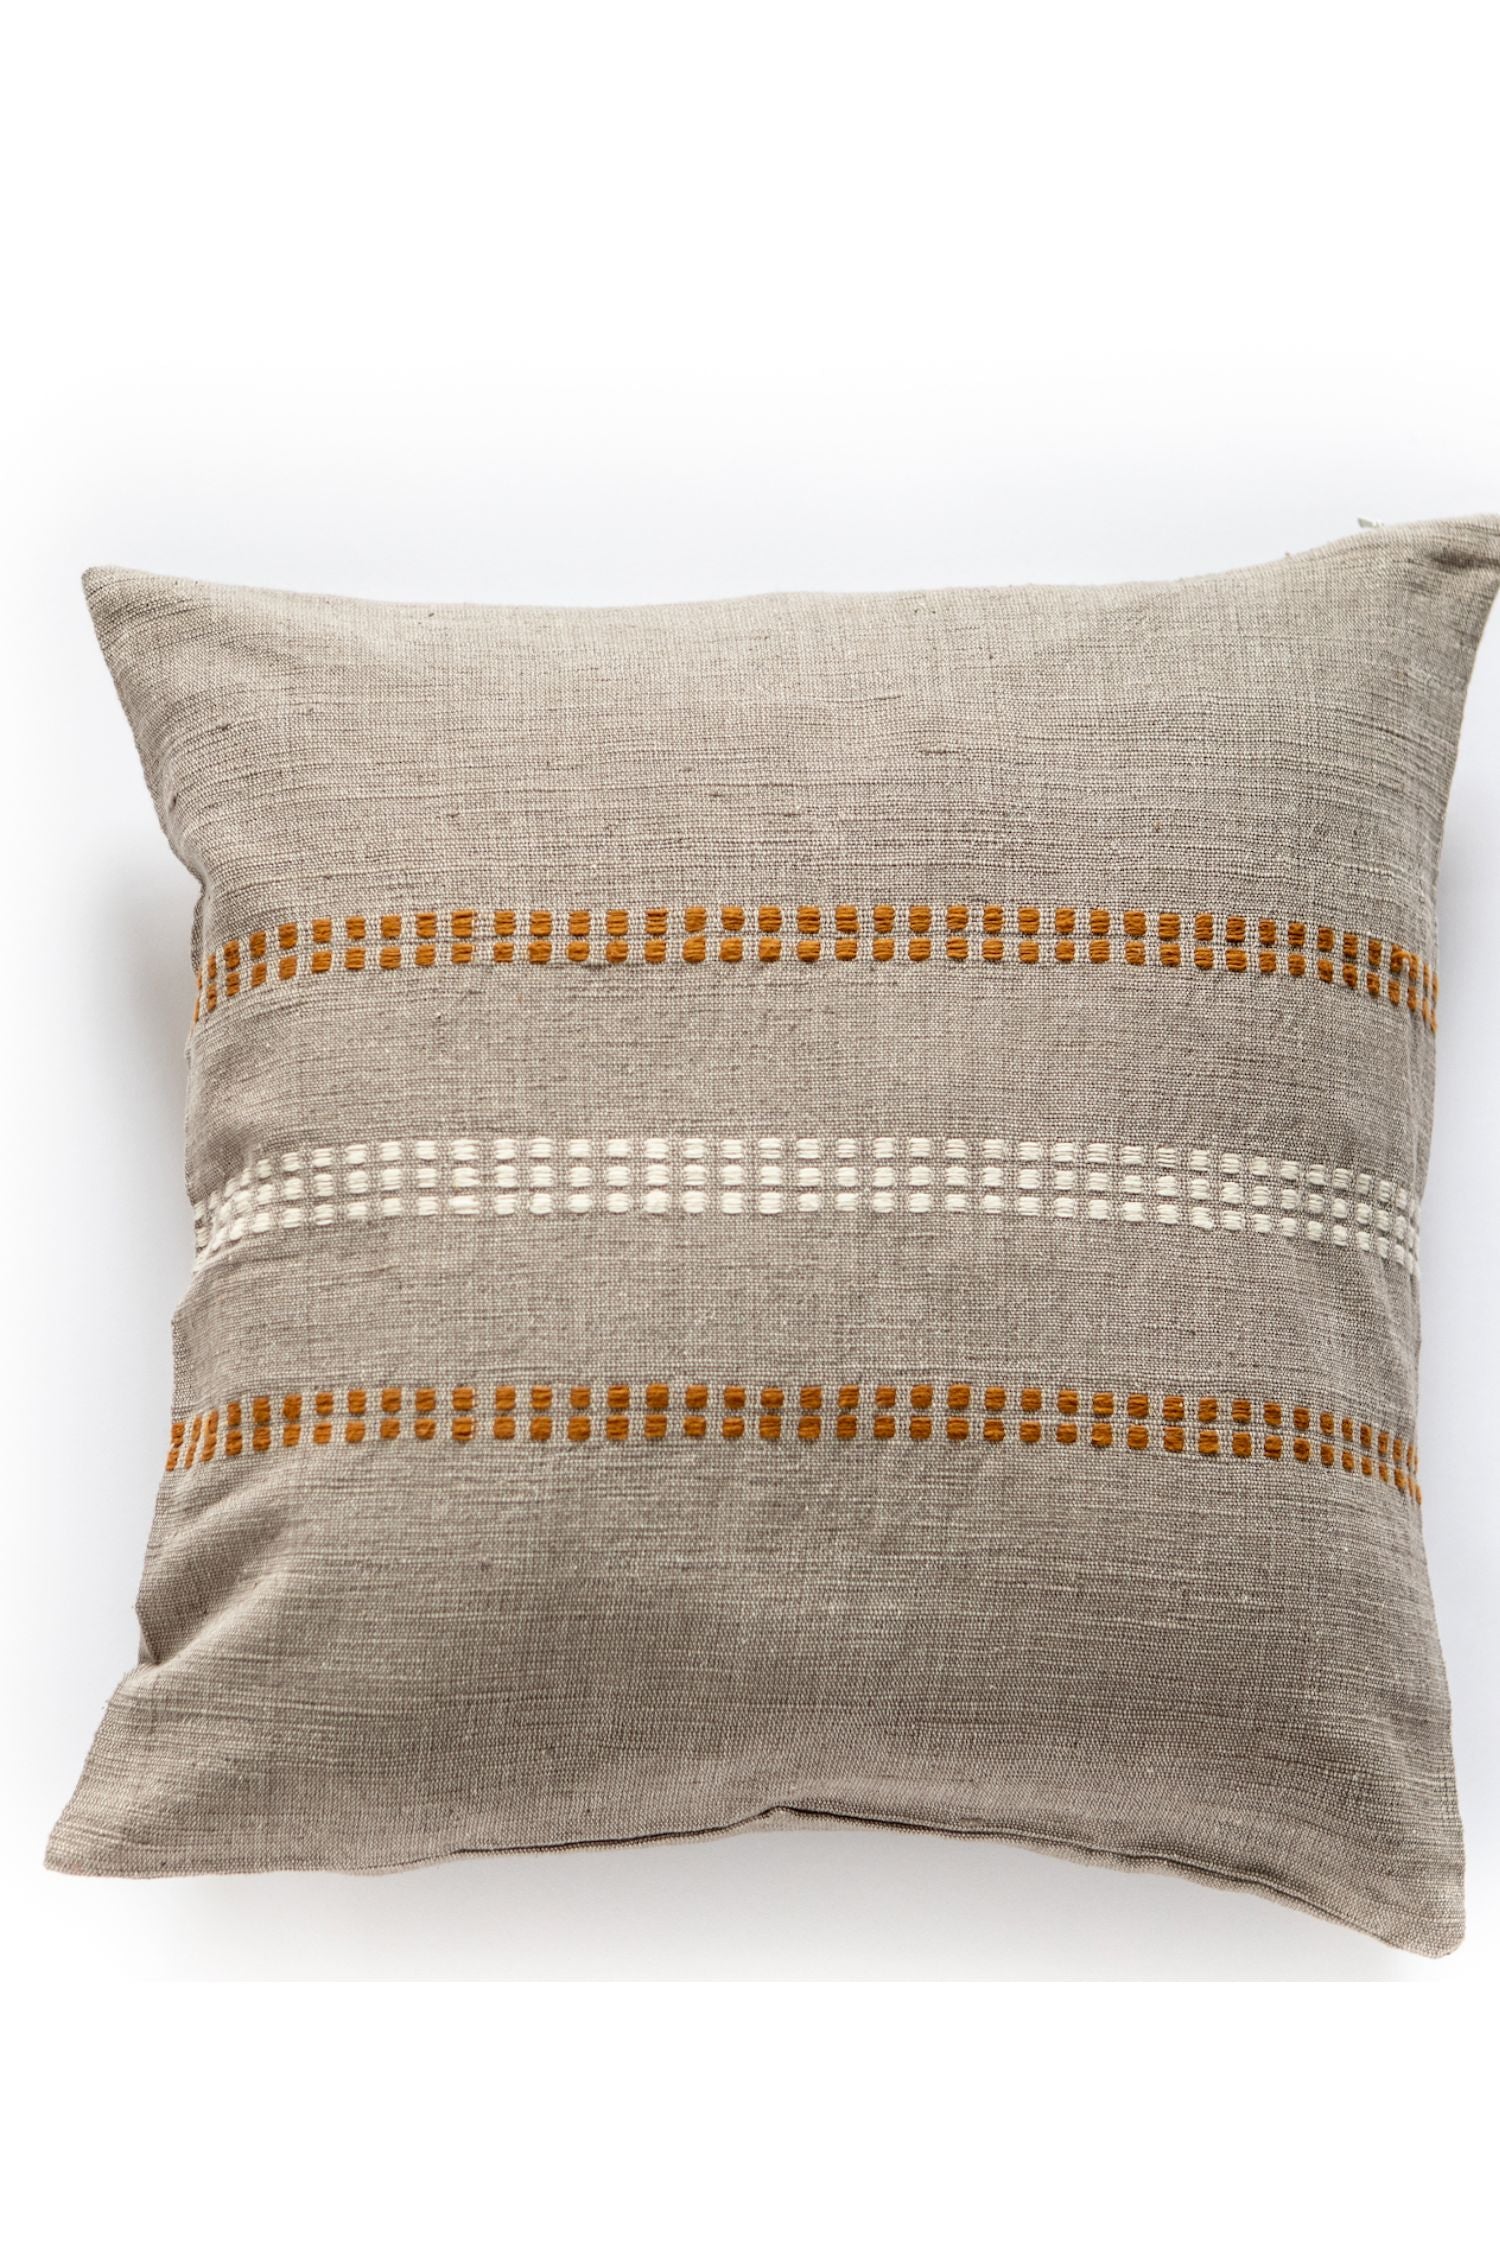 Hand Embroidered Cushion Cover - Stone